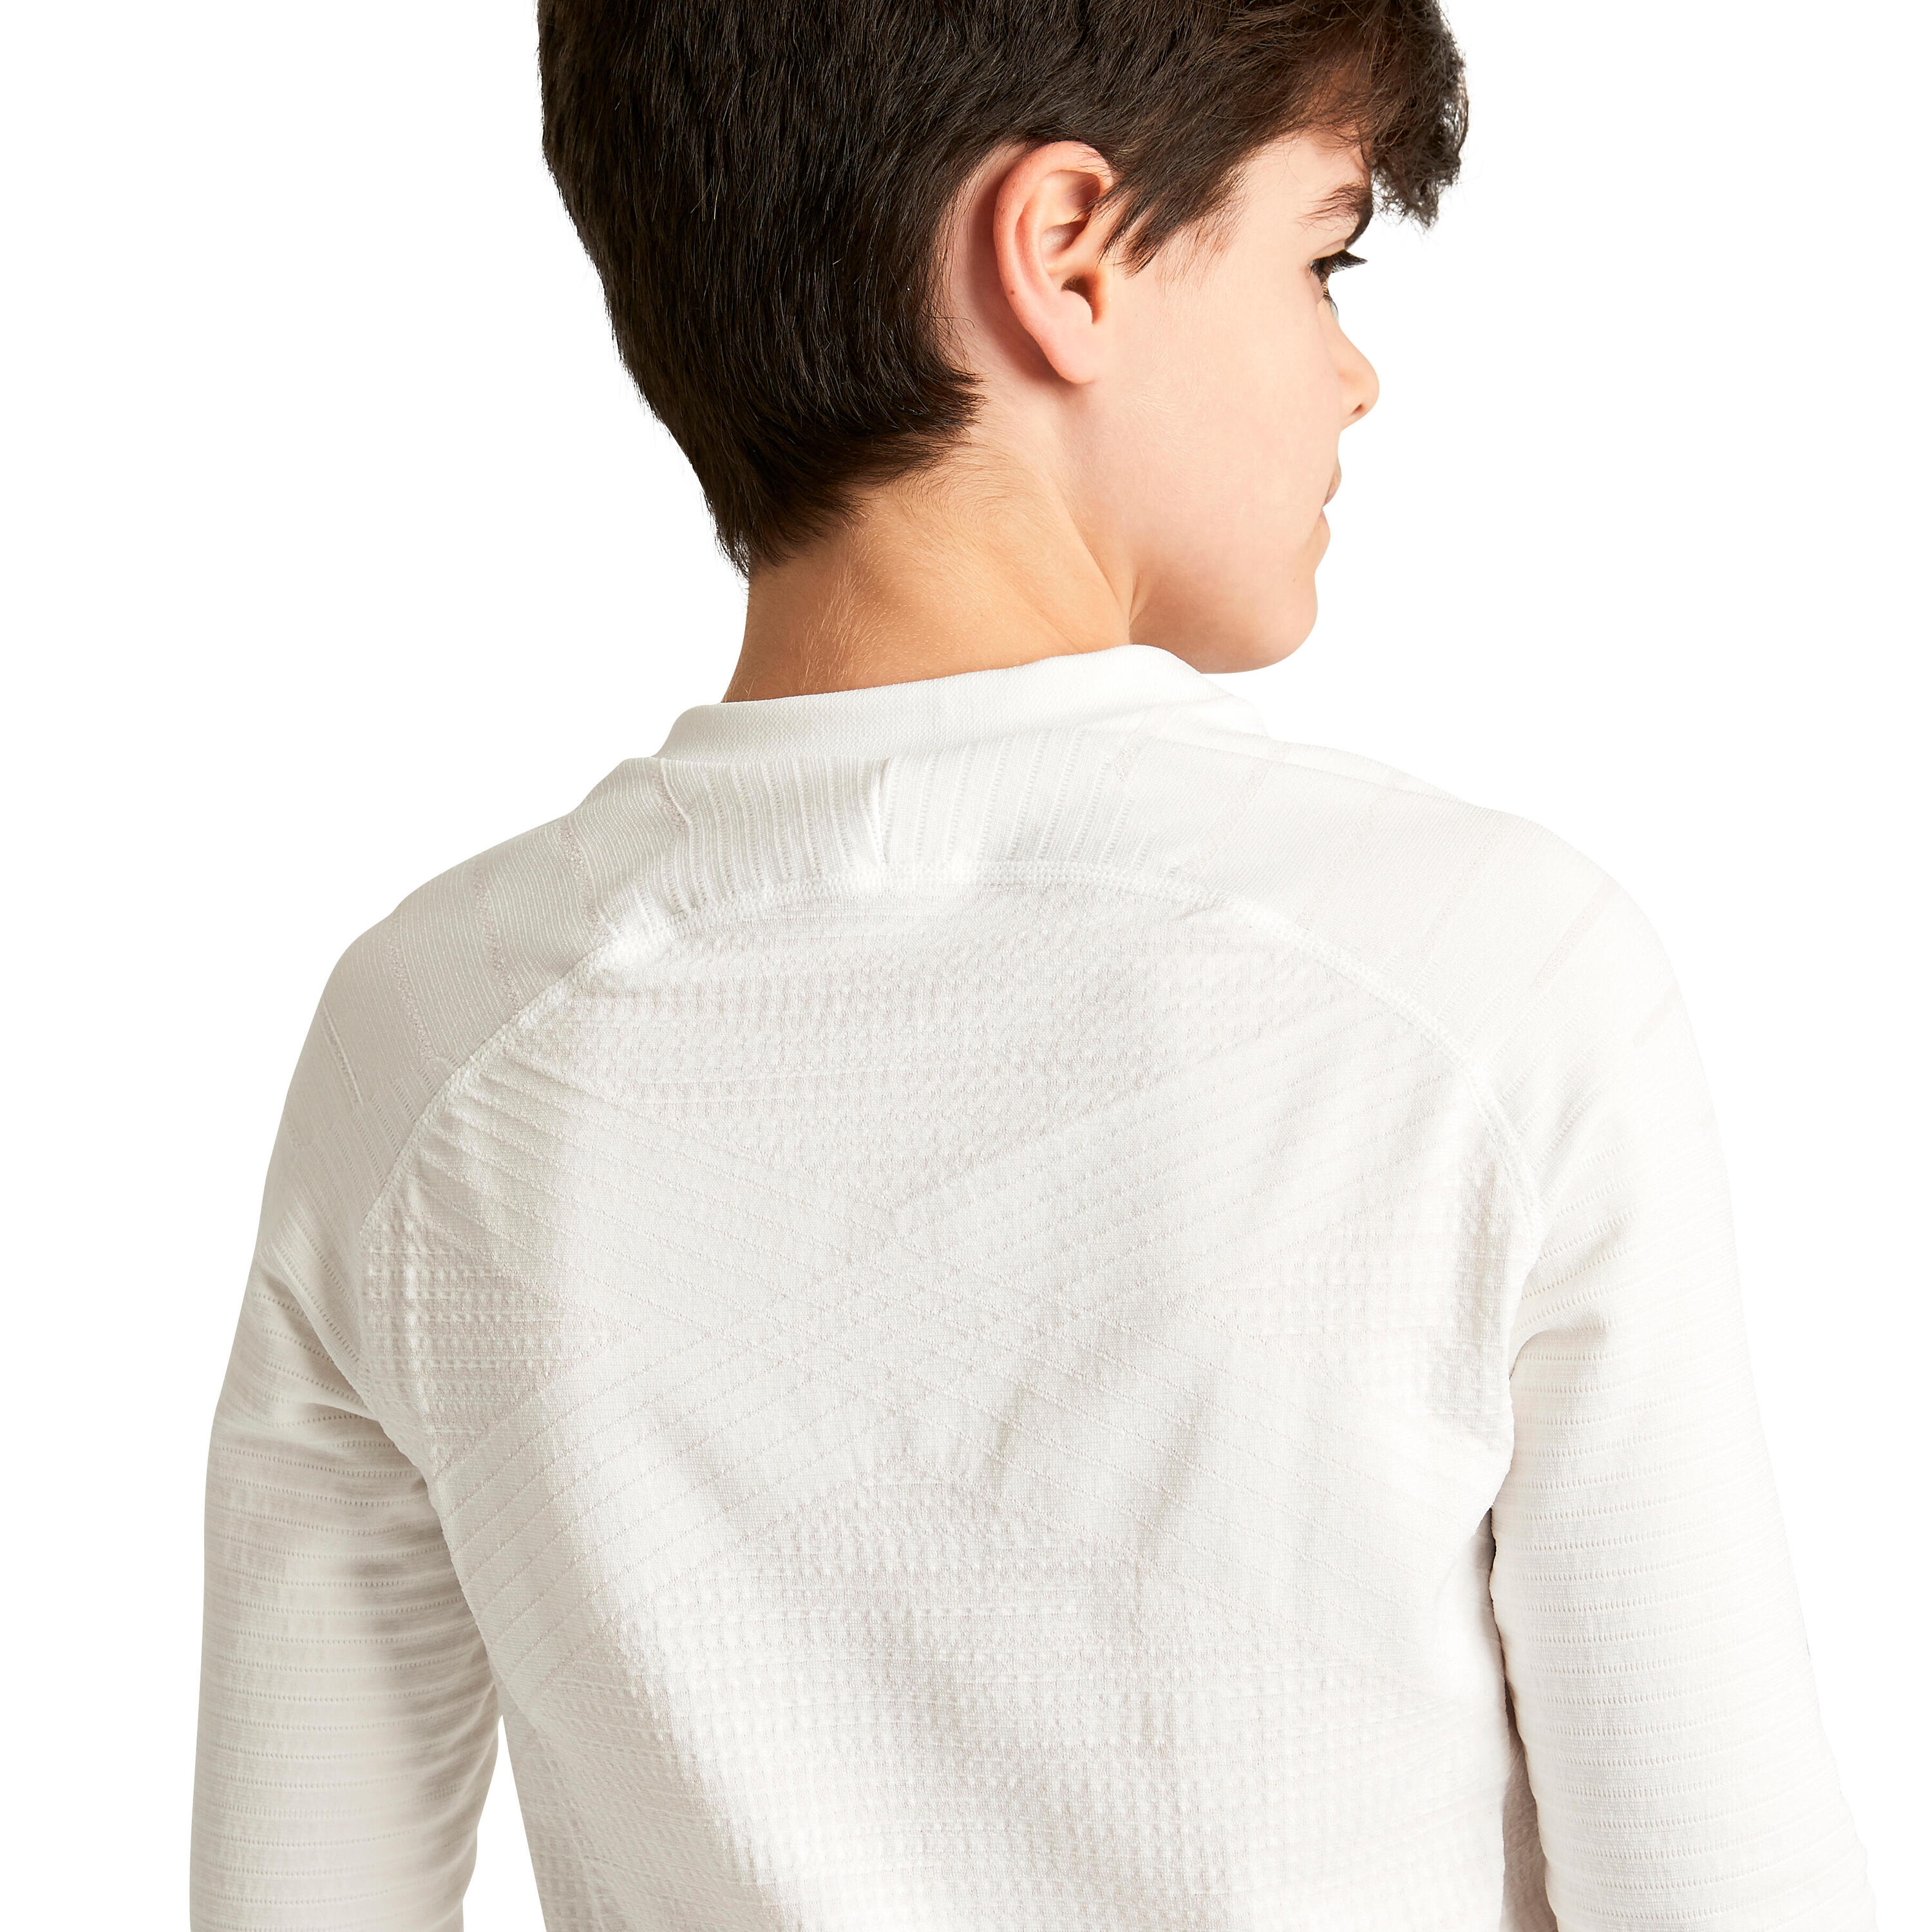 Kids' Long-Sleeved Thermal Base Layer Top Keepdry 500 - White 10/11